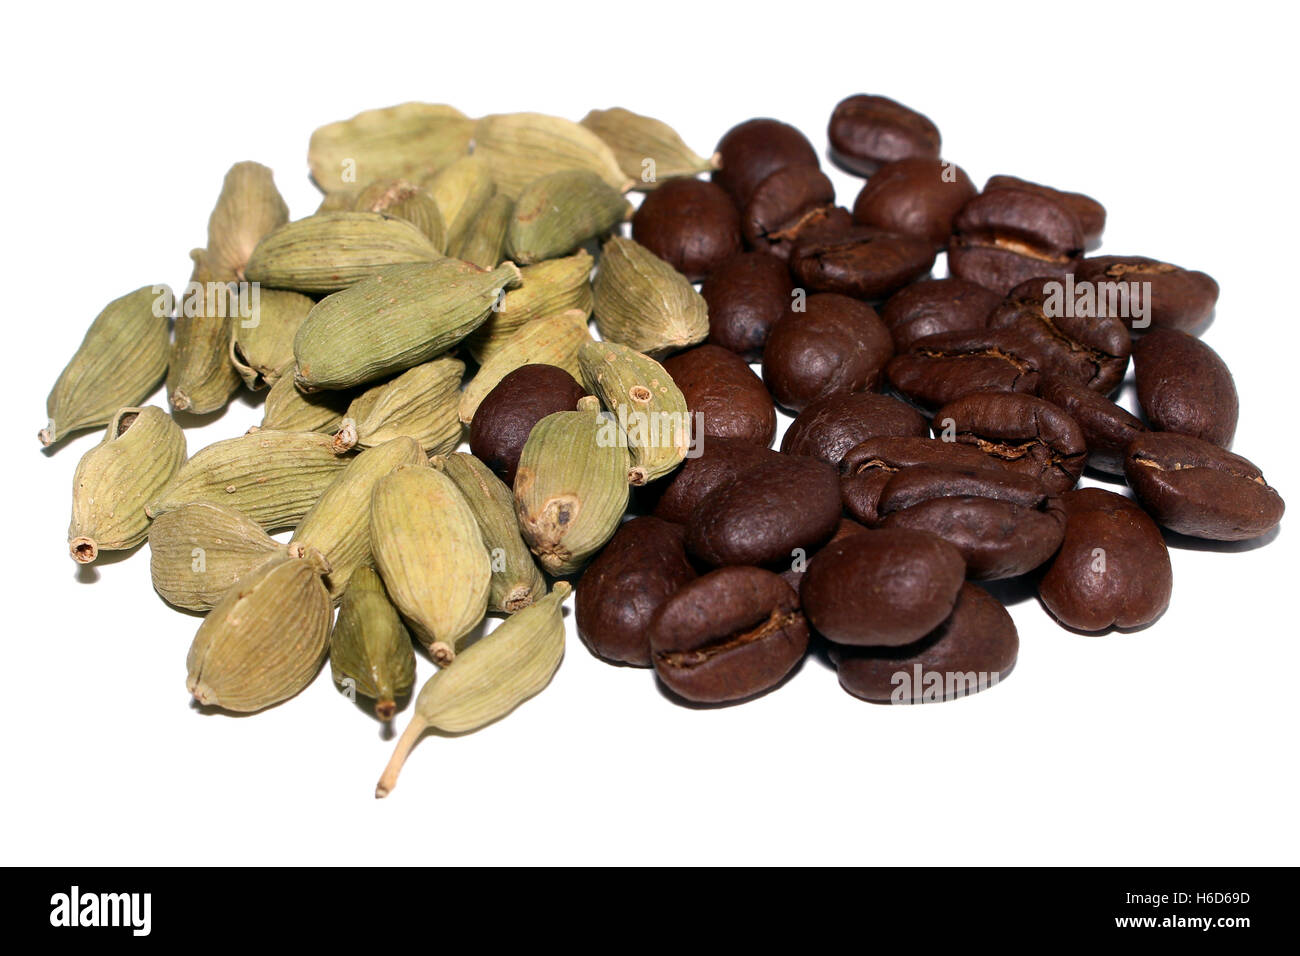 Cardamon and coffee beans piled side by side Stock Photo